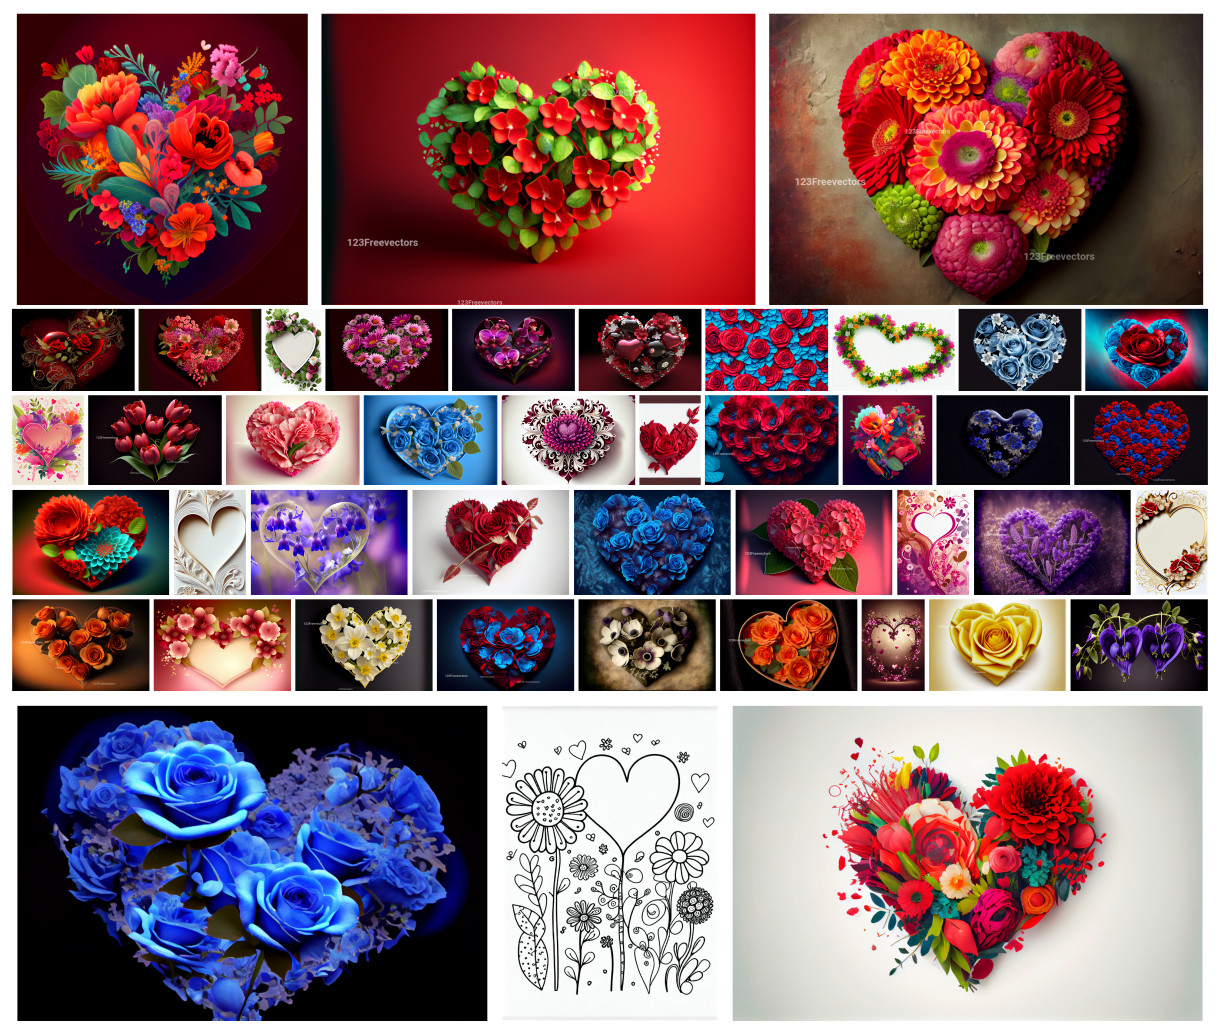 Whispers of Love: Floral Heart Designs of Elegance